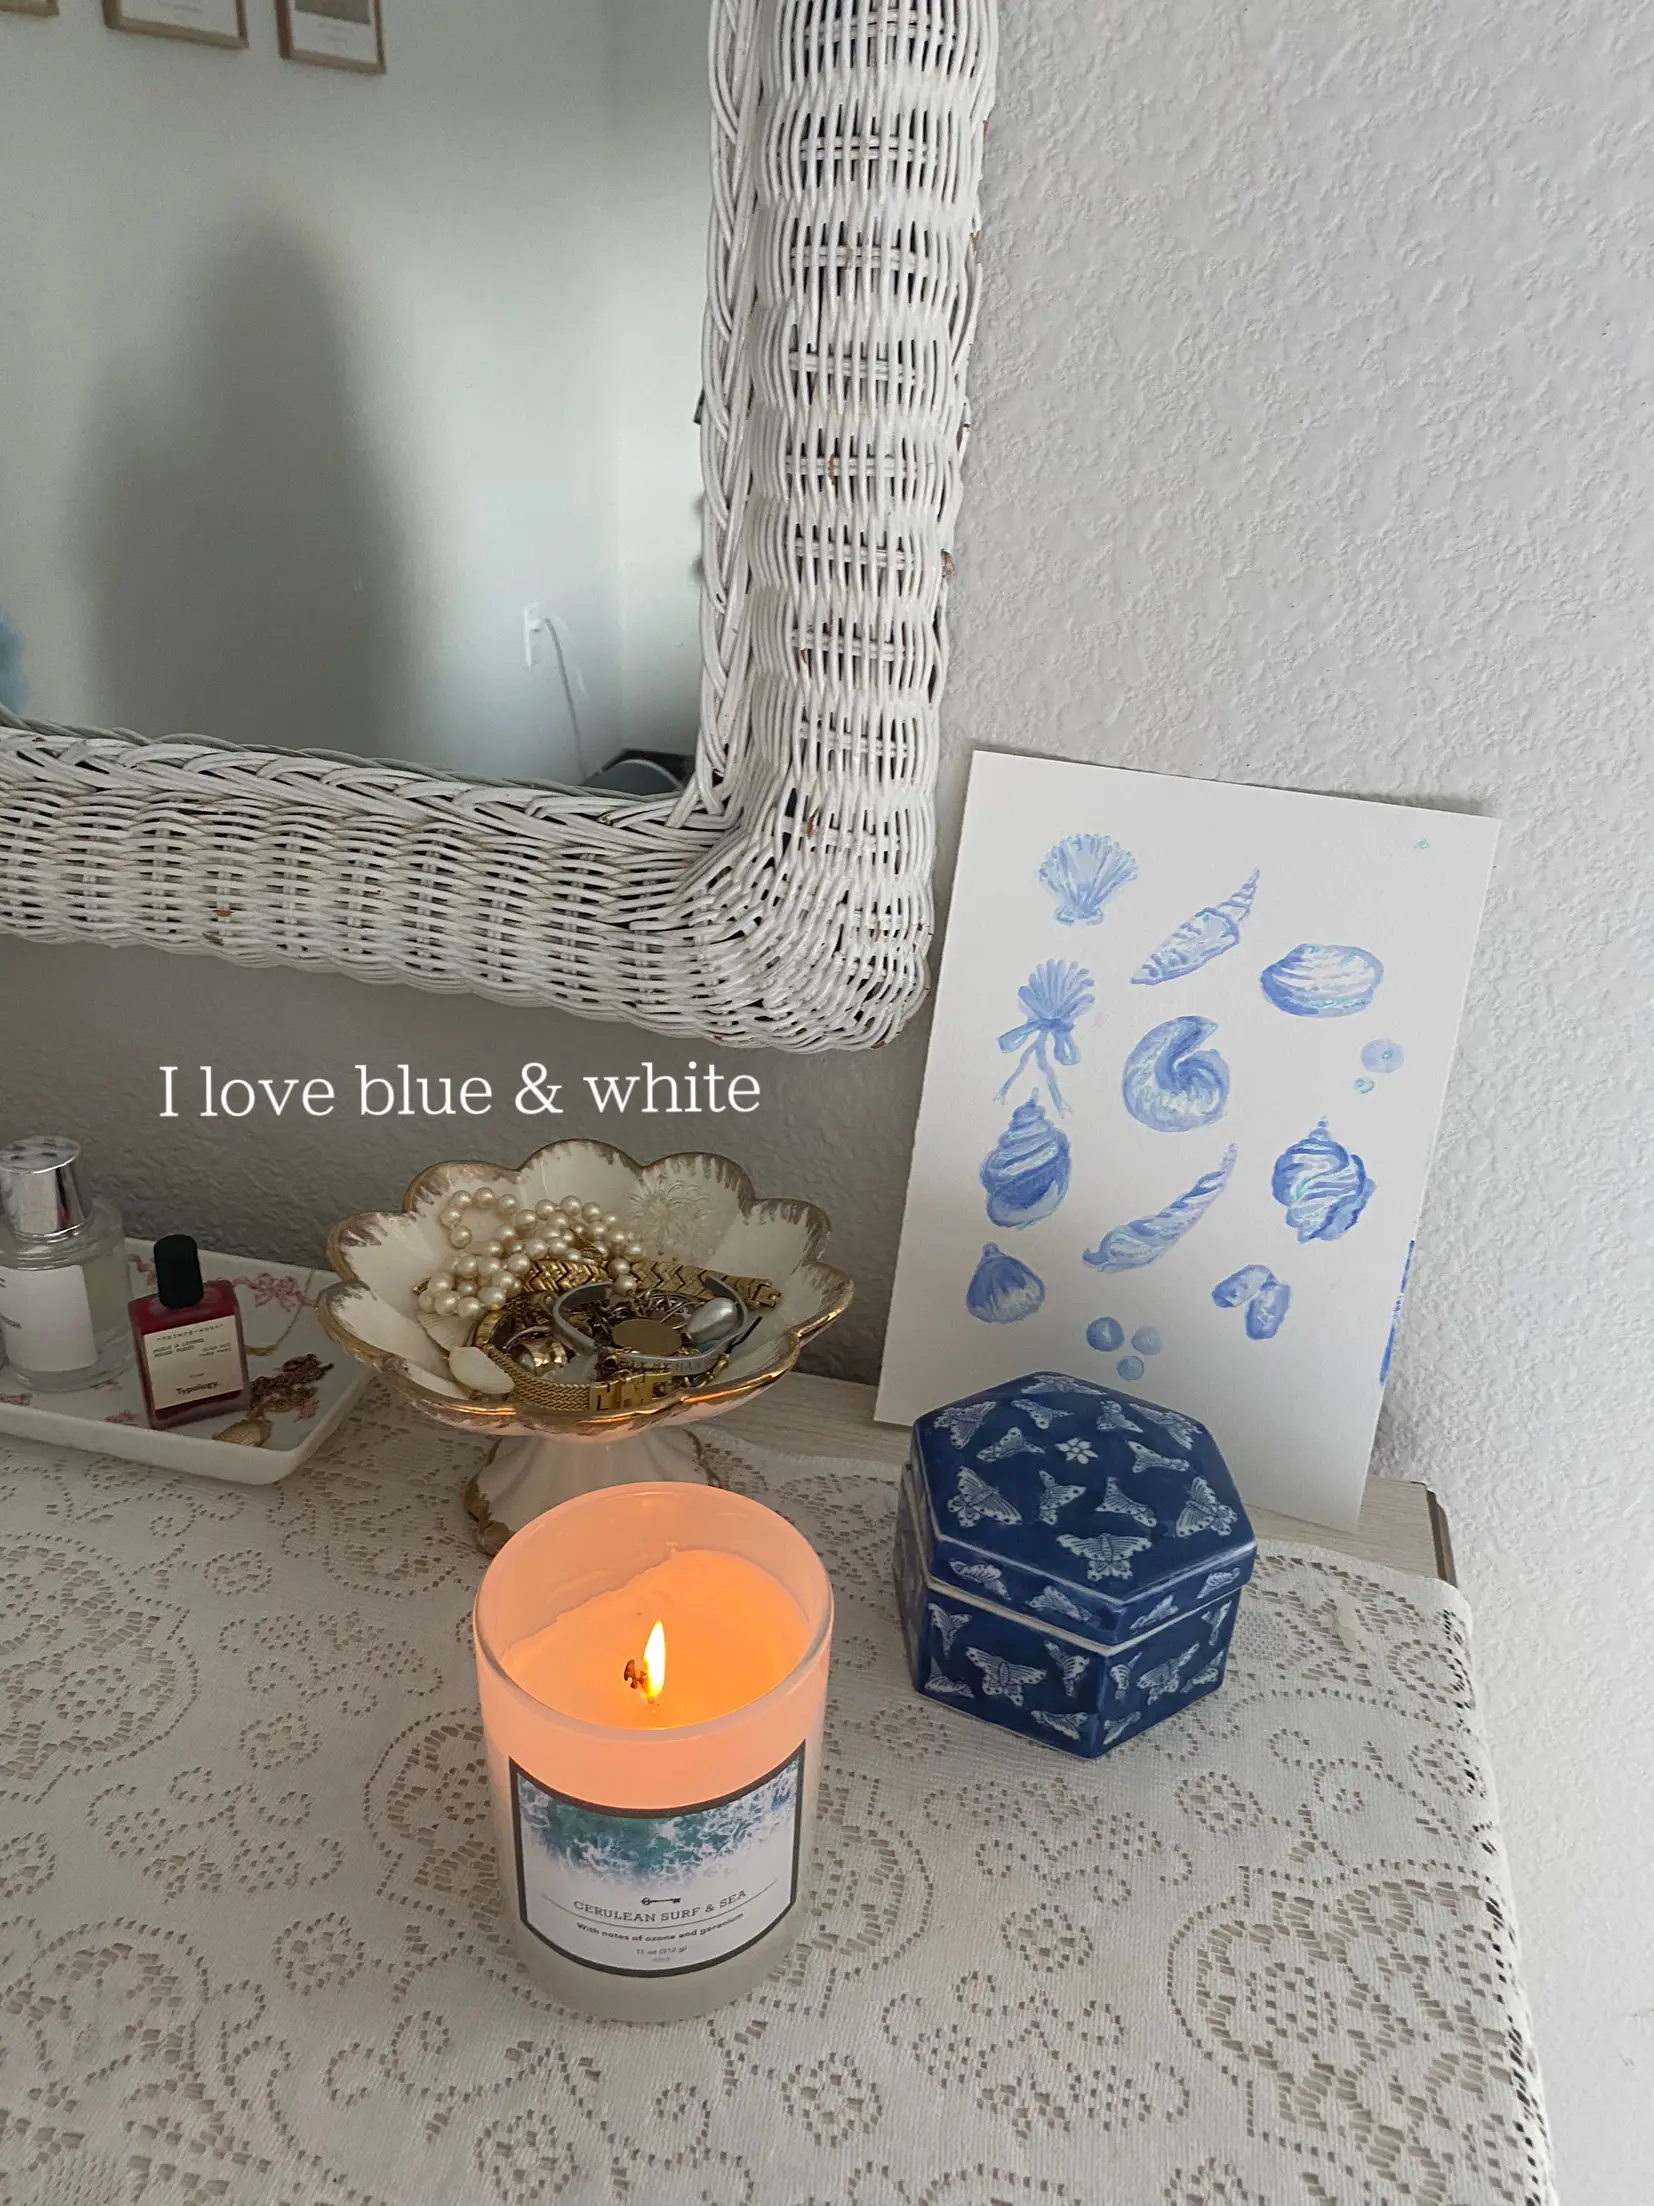  A table with a candle and a picture of a flower.